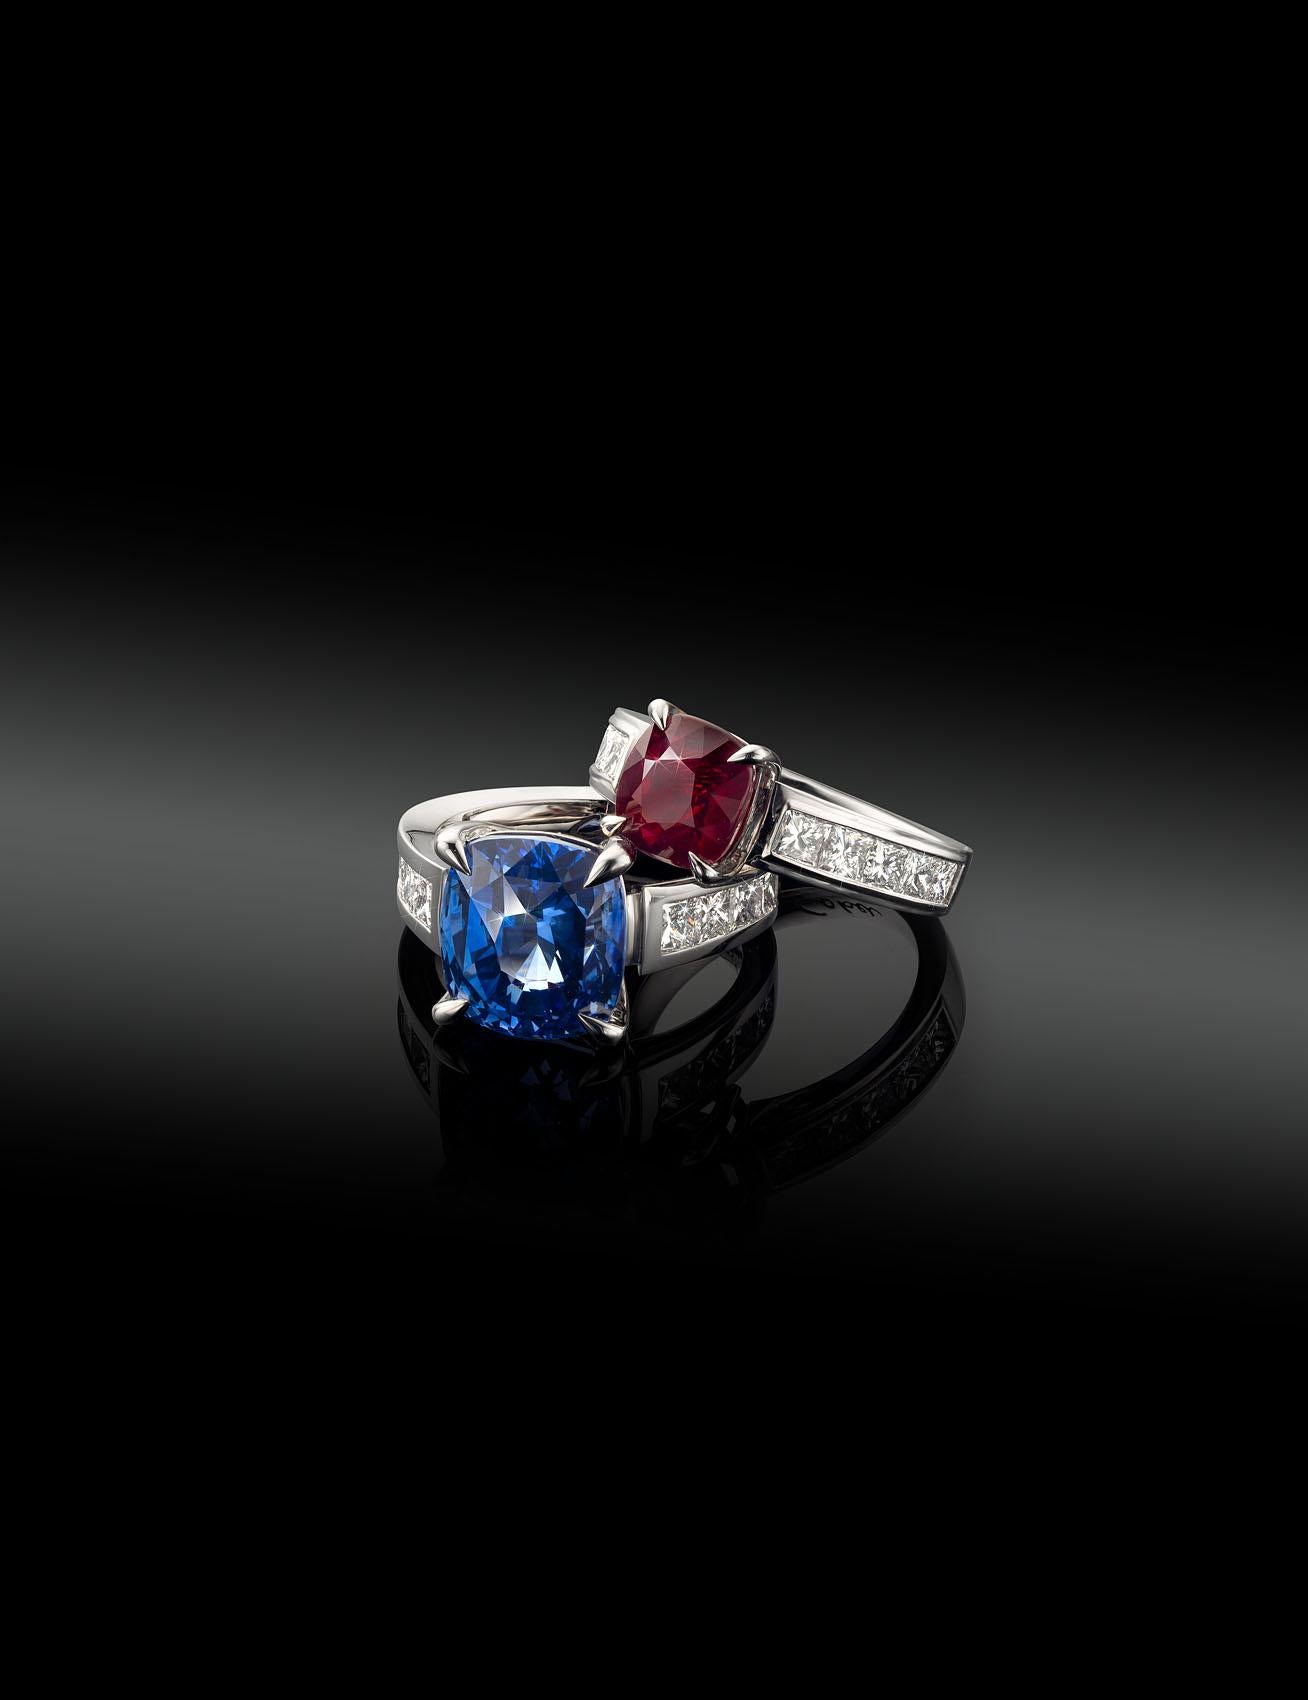 For Sale:  Cober Jewellery with 3.03 Carat Ruby  1.60 Carat total Diamonds White Gold Ring  9